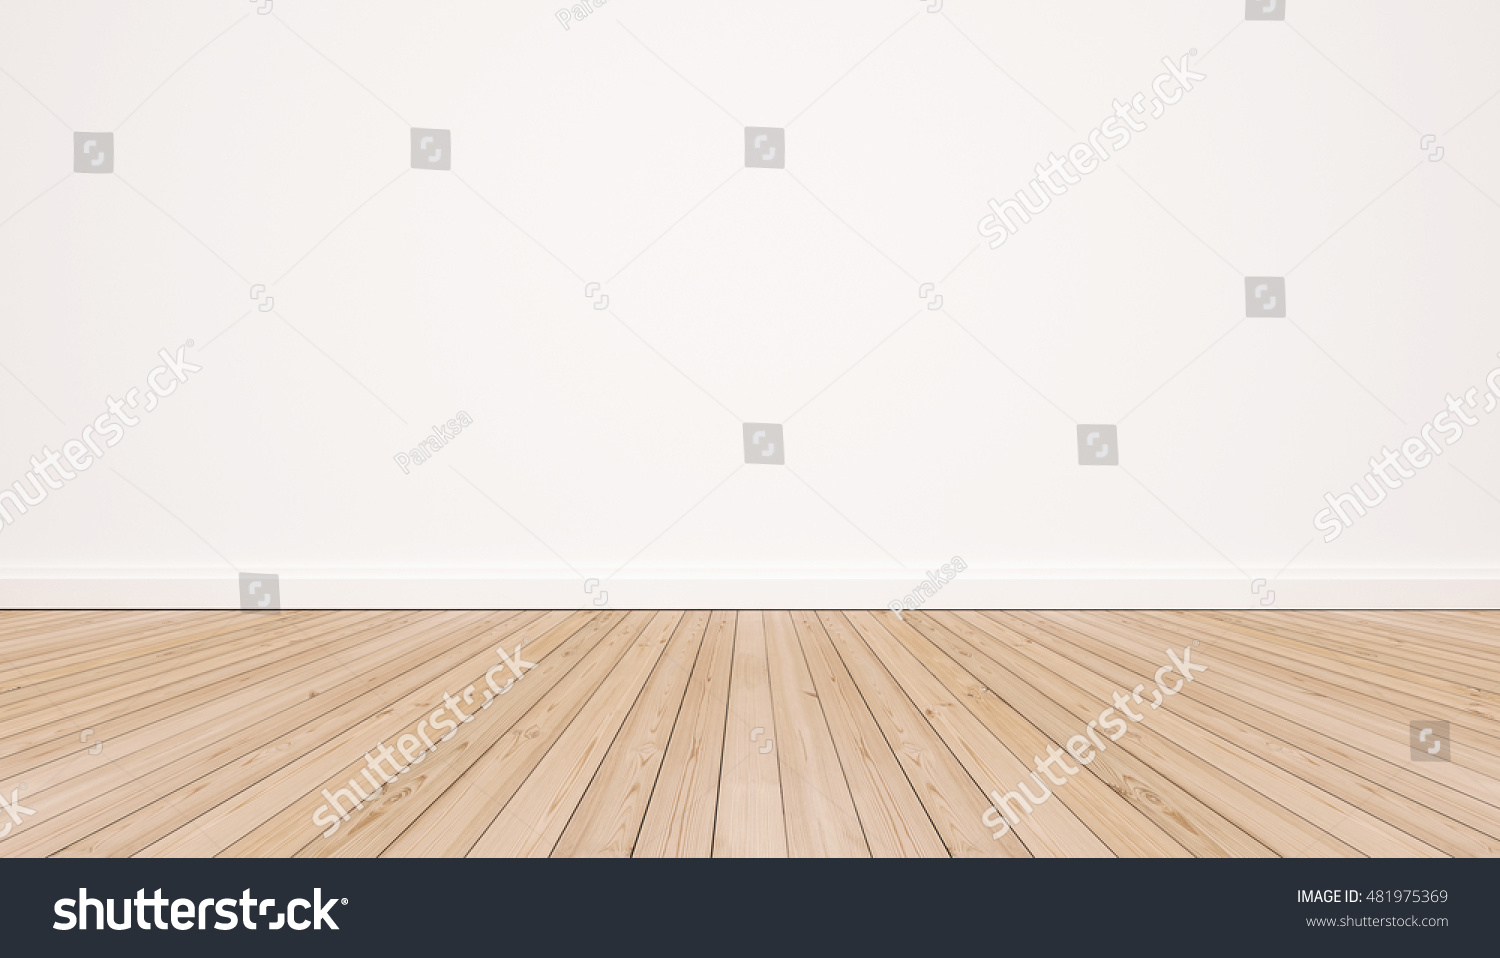 Oak wood floor with white wall #481975369